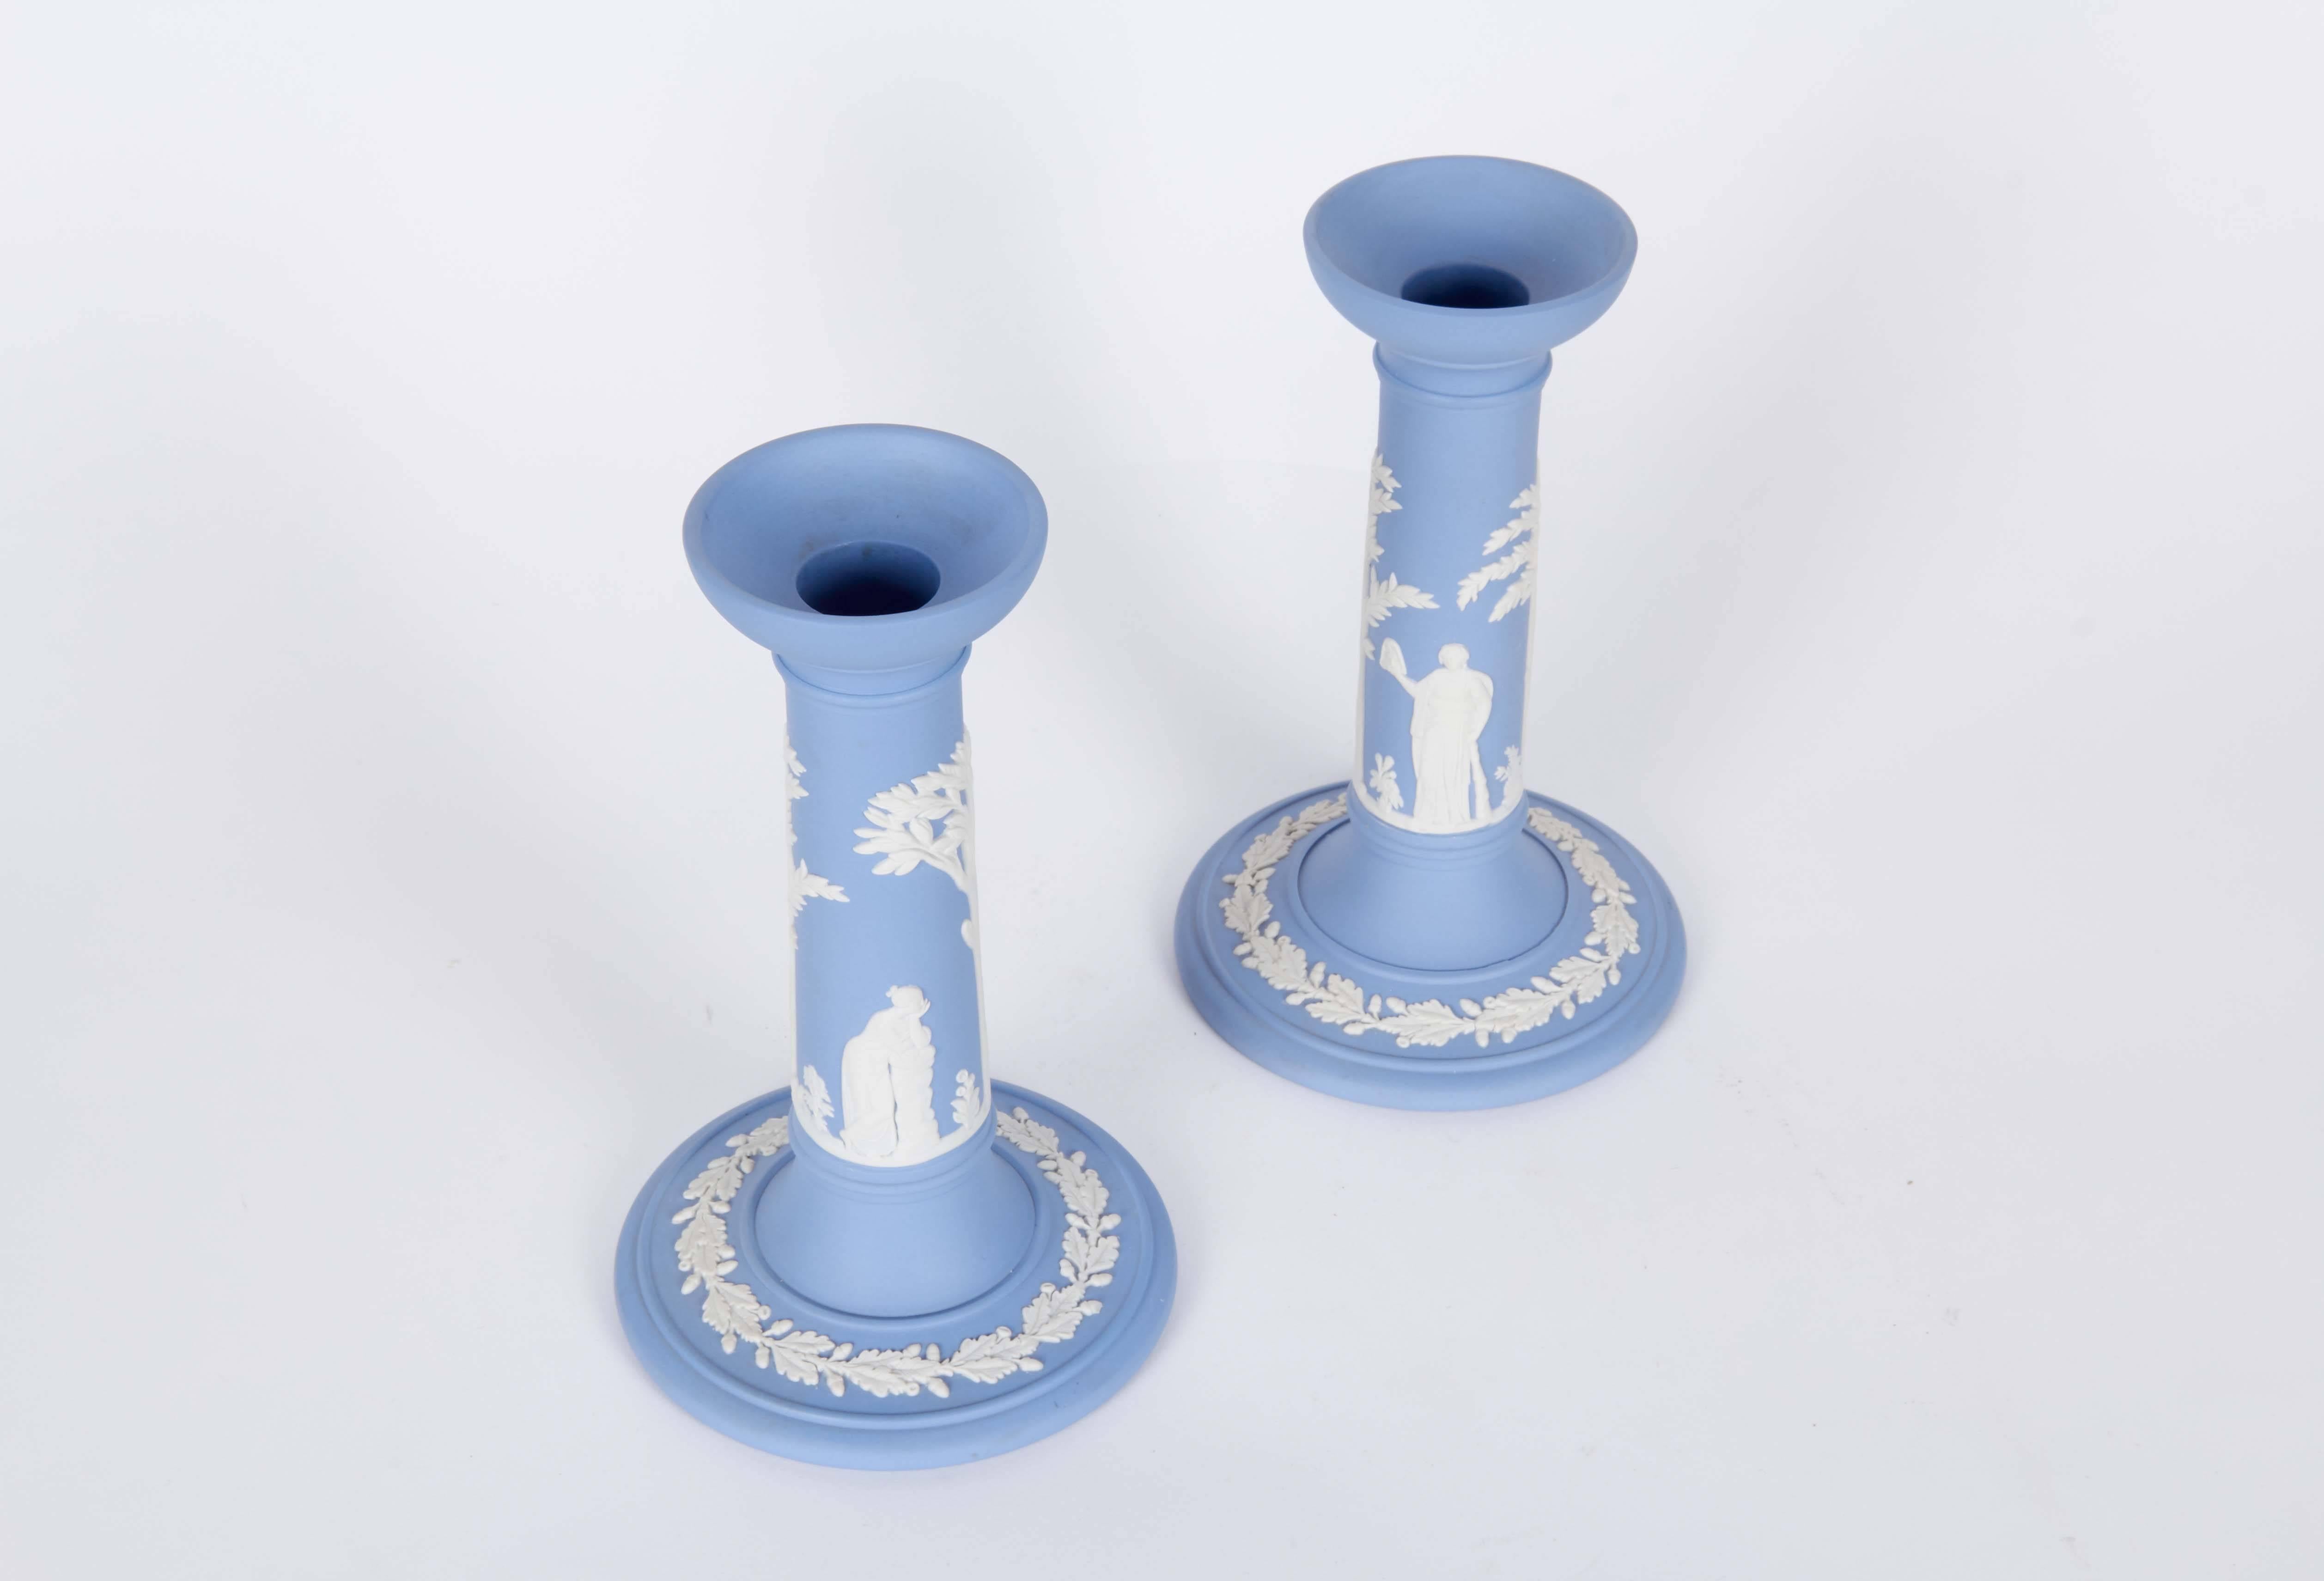 Porcelain Pair of Jasperware Candlesticks and Bowl by Wedgwood